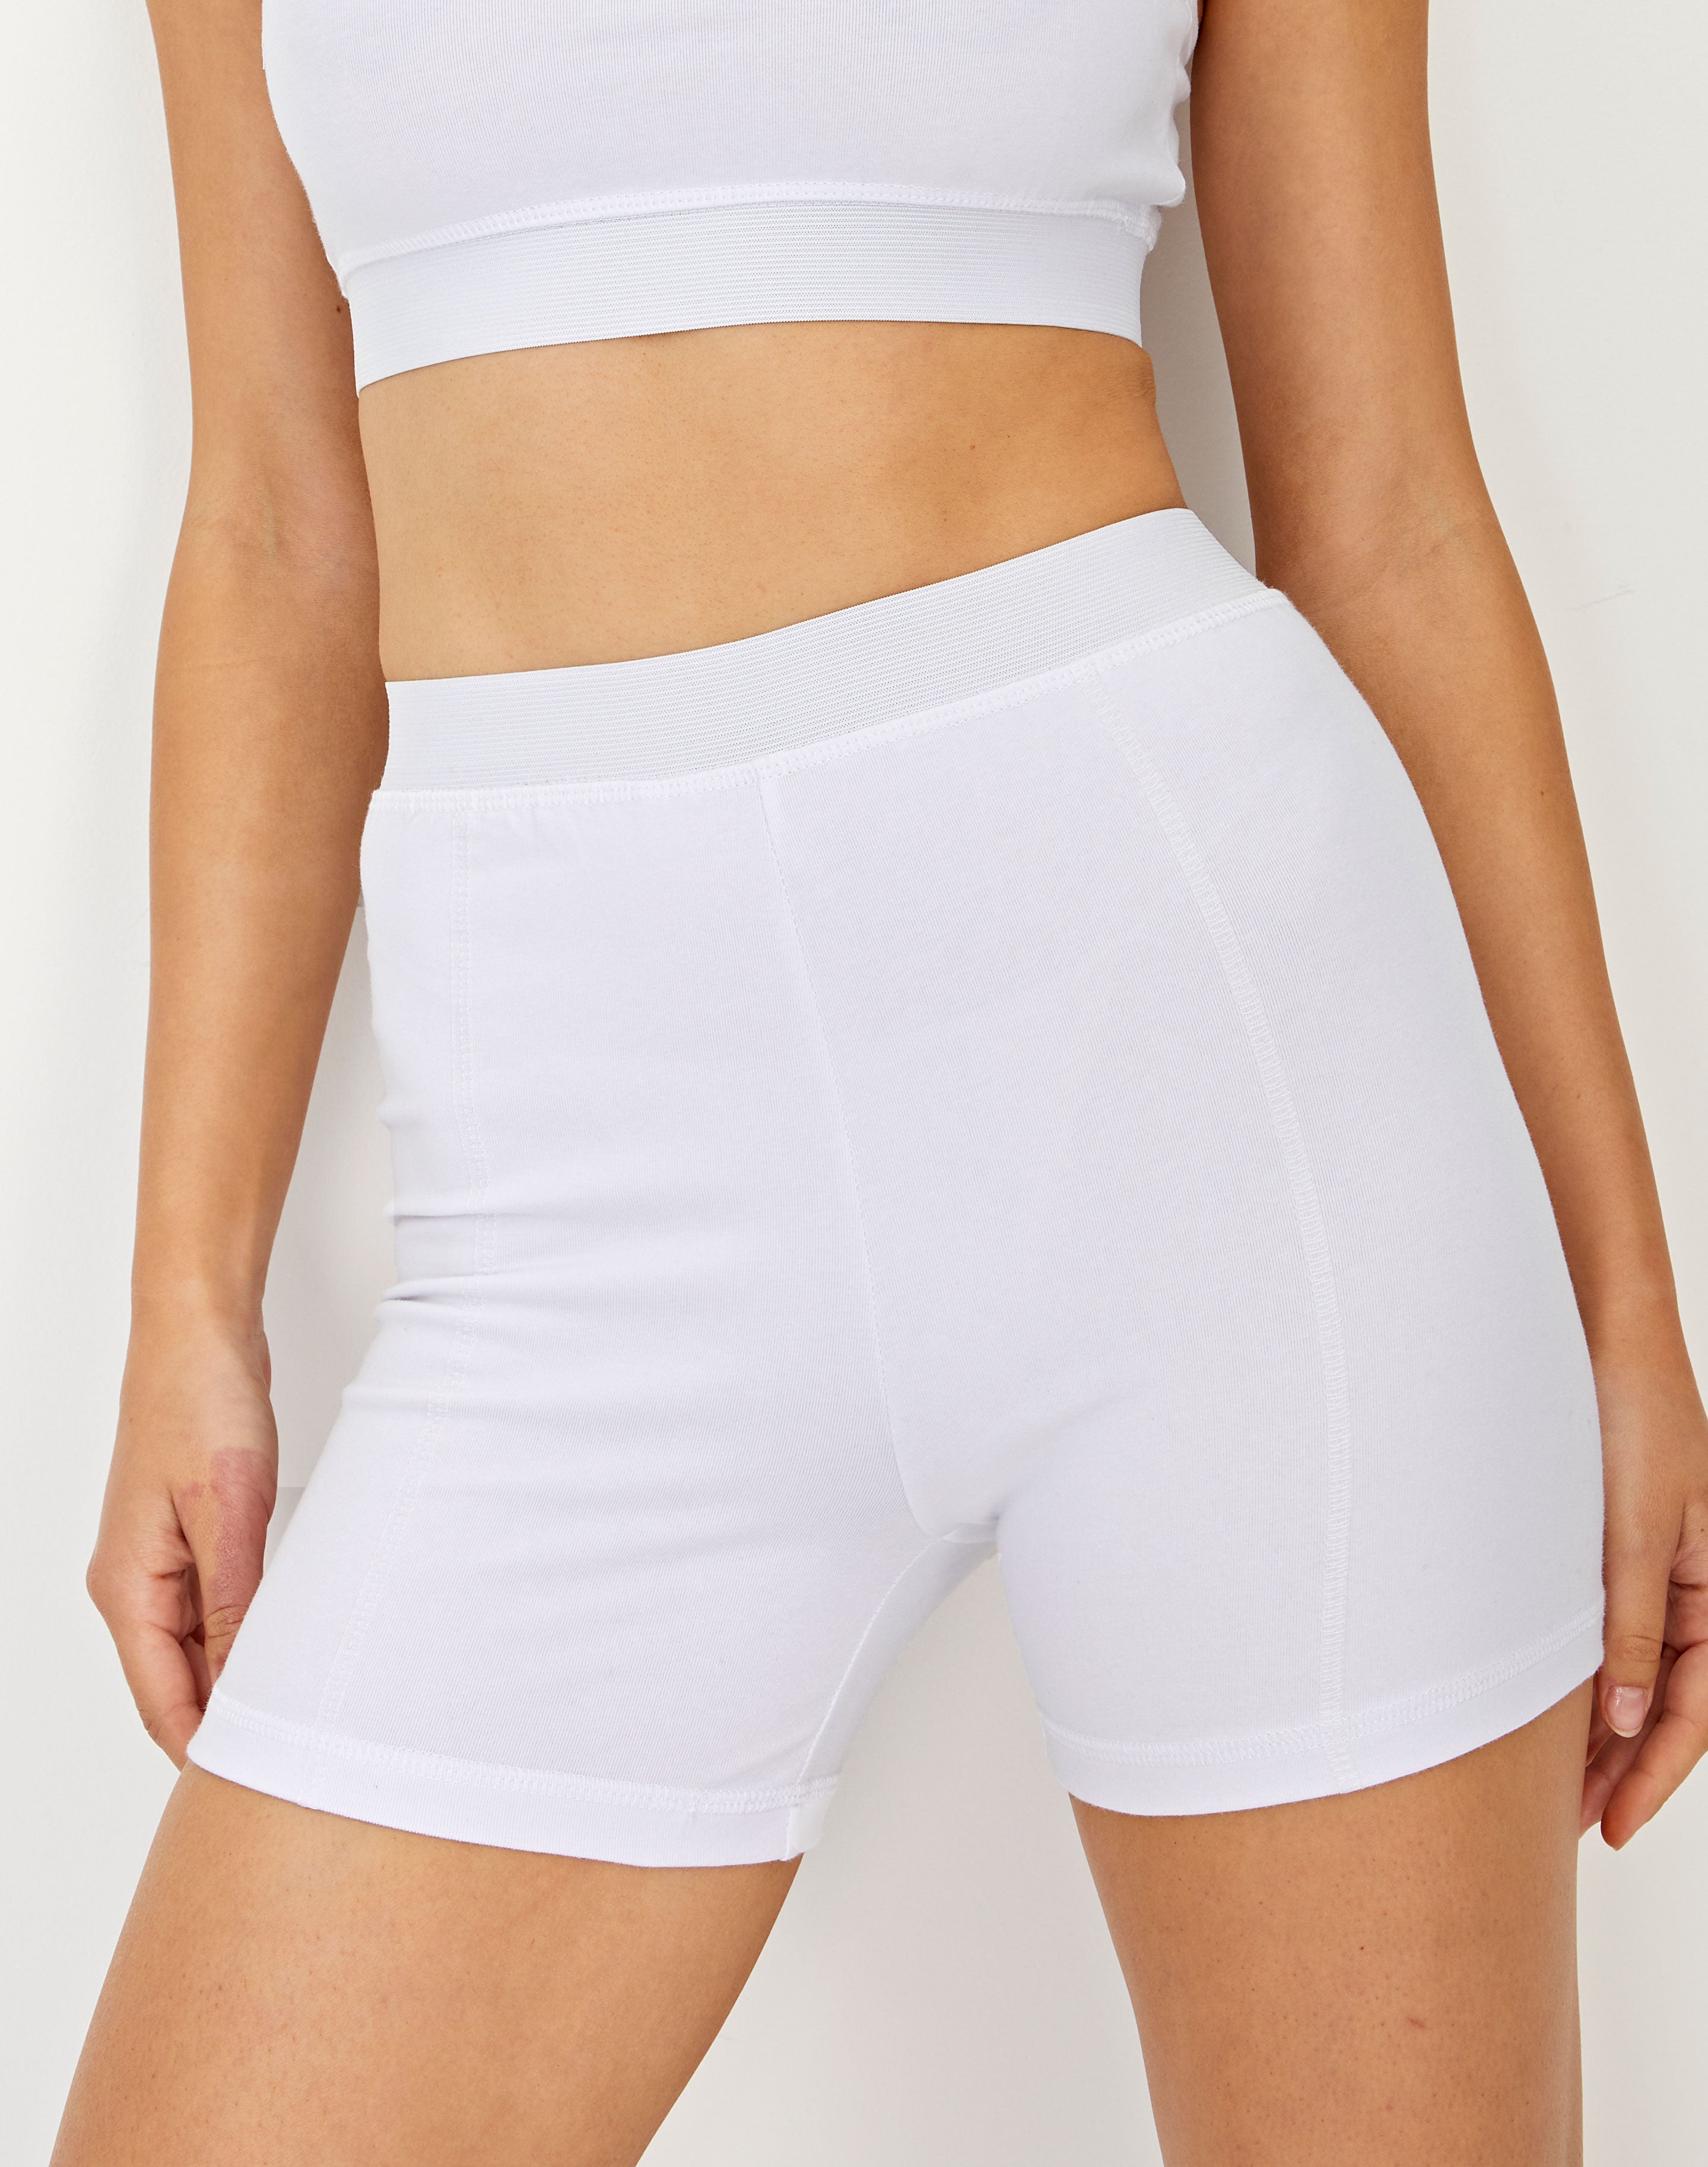 white bicycle shorts womens